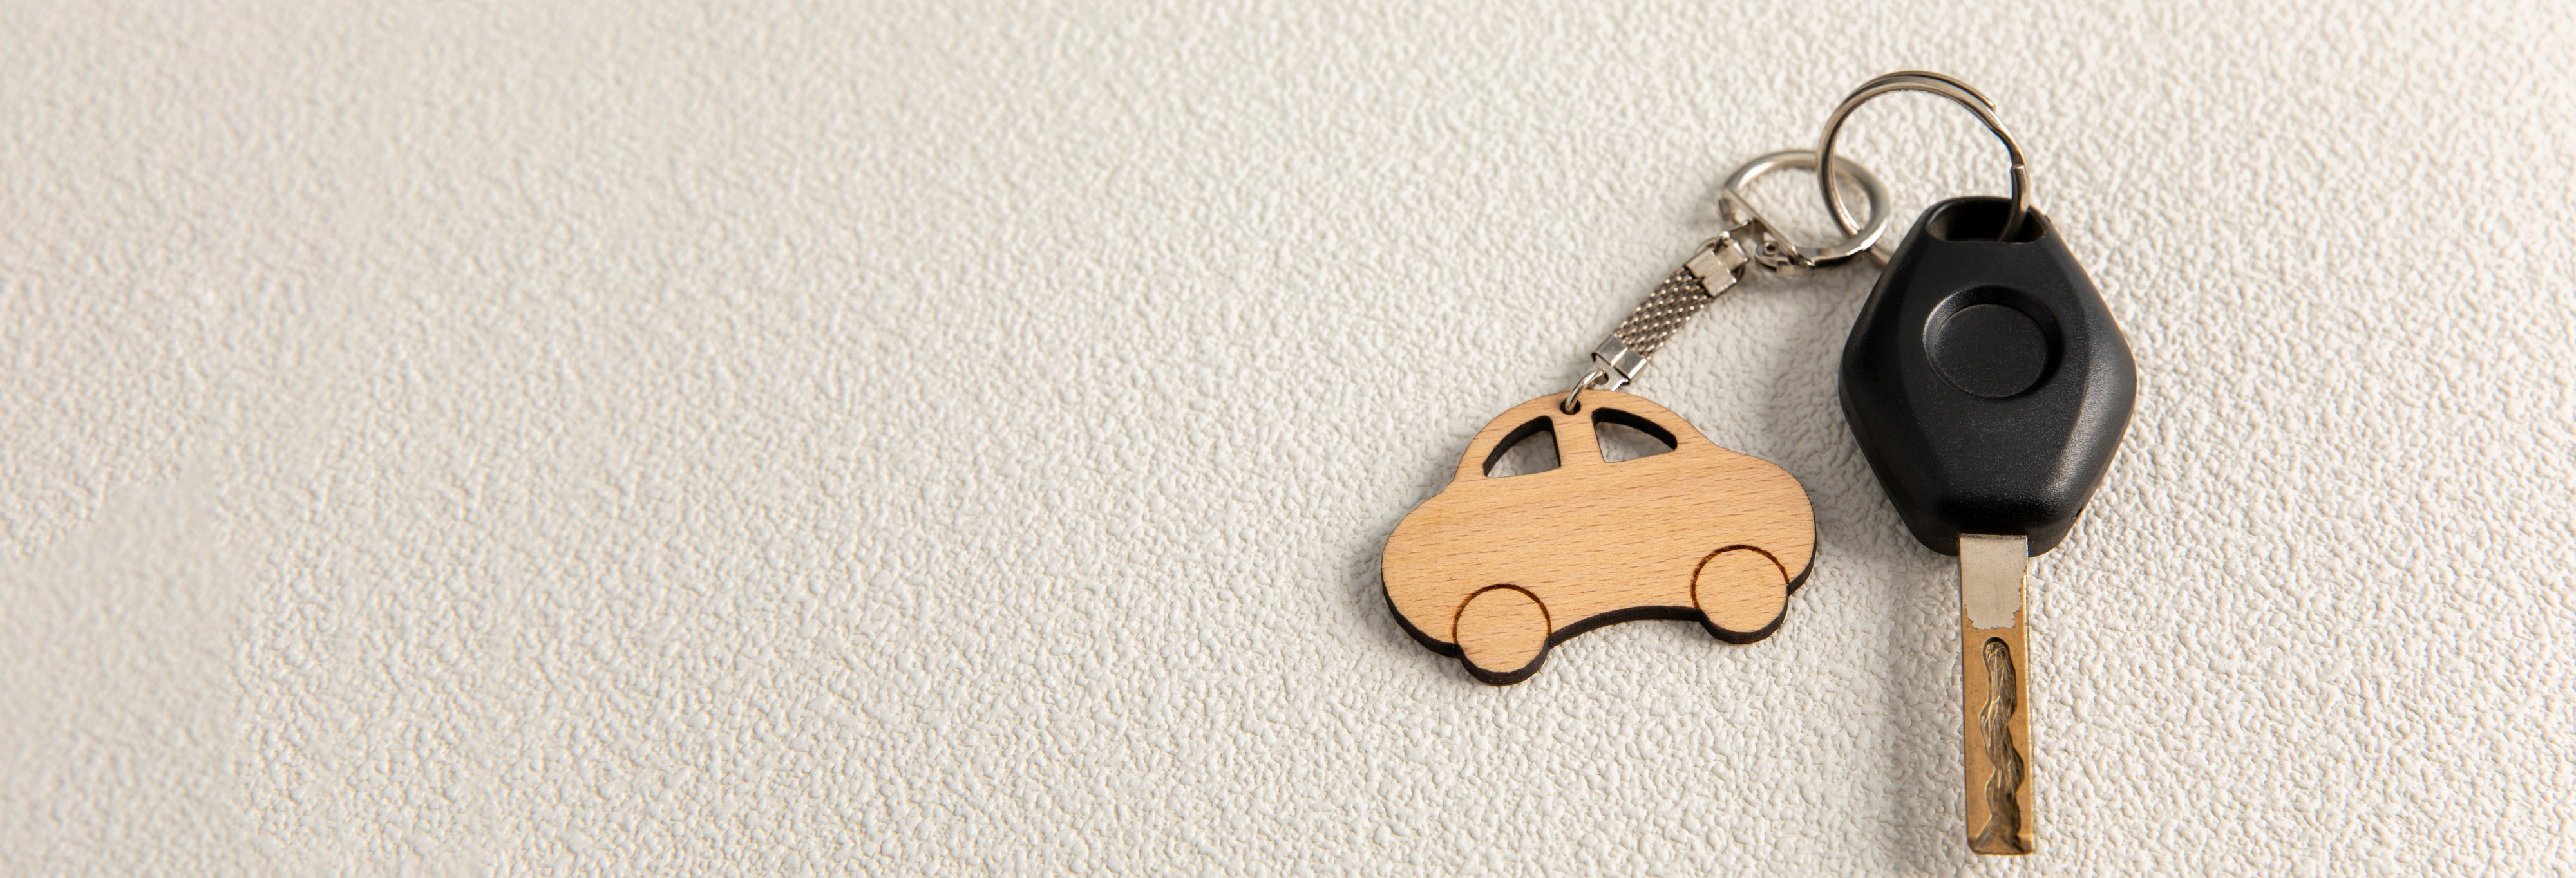 A black car key with a wooden car-shaped key ring on a white textured background.